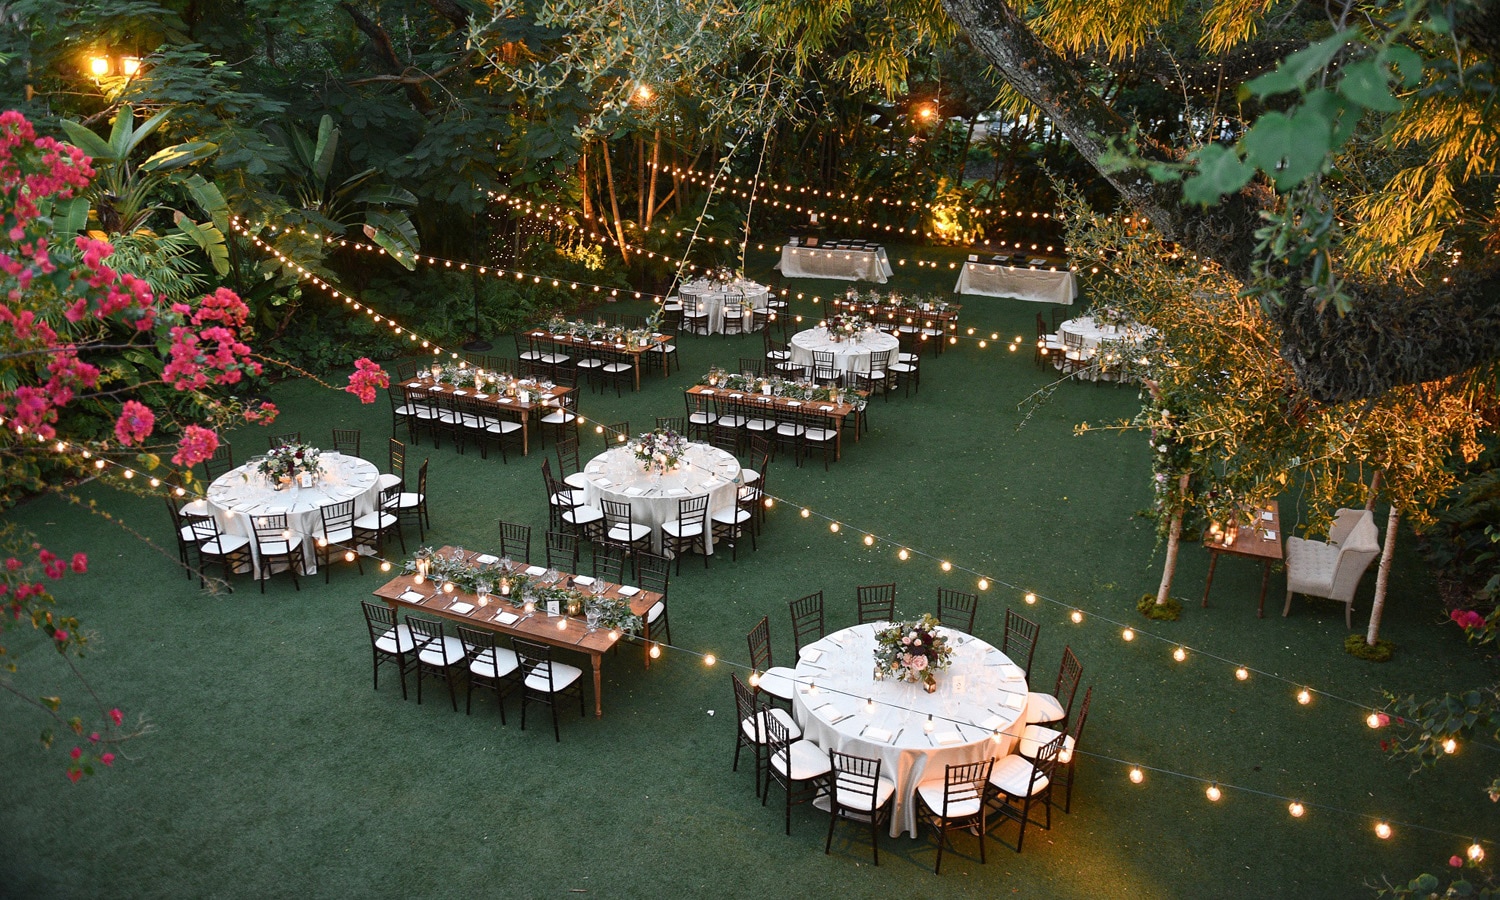 How To Select Your Favorite Wedding Venue